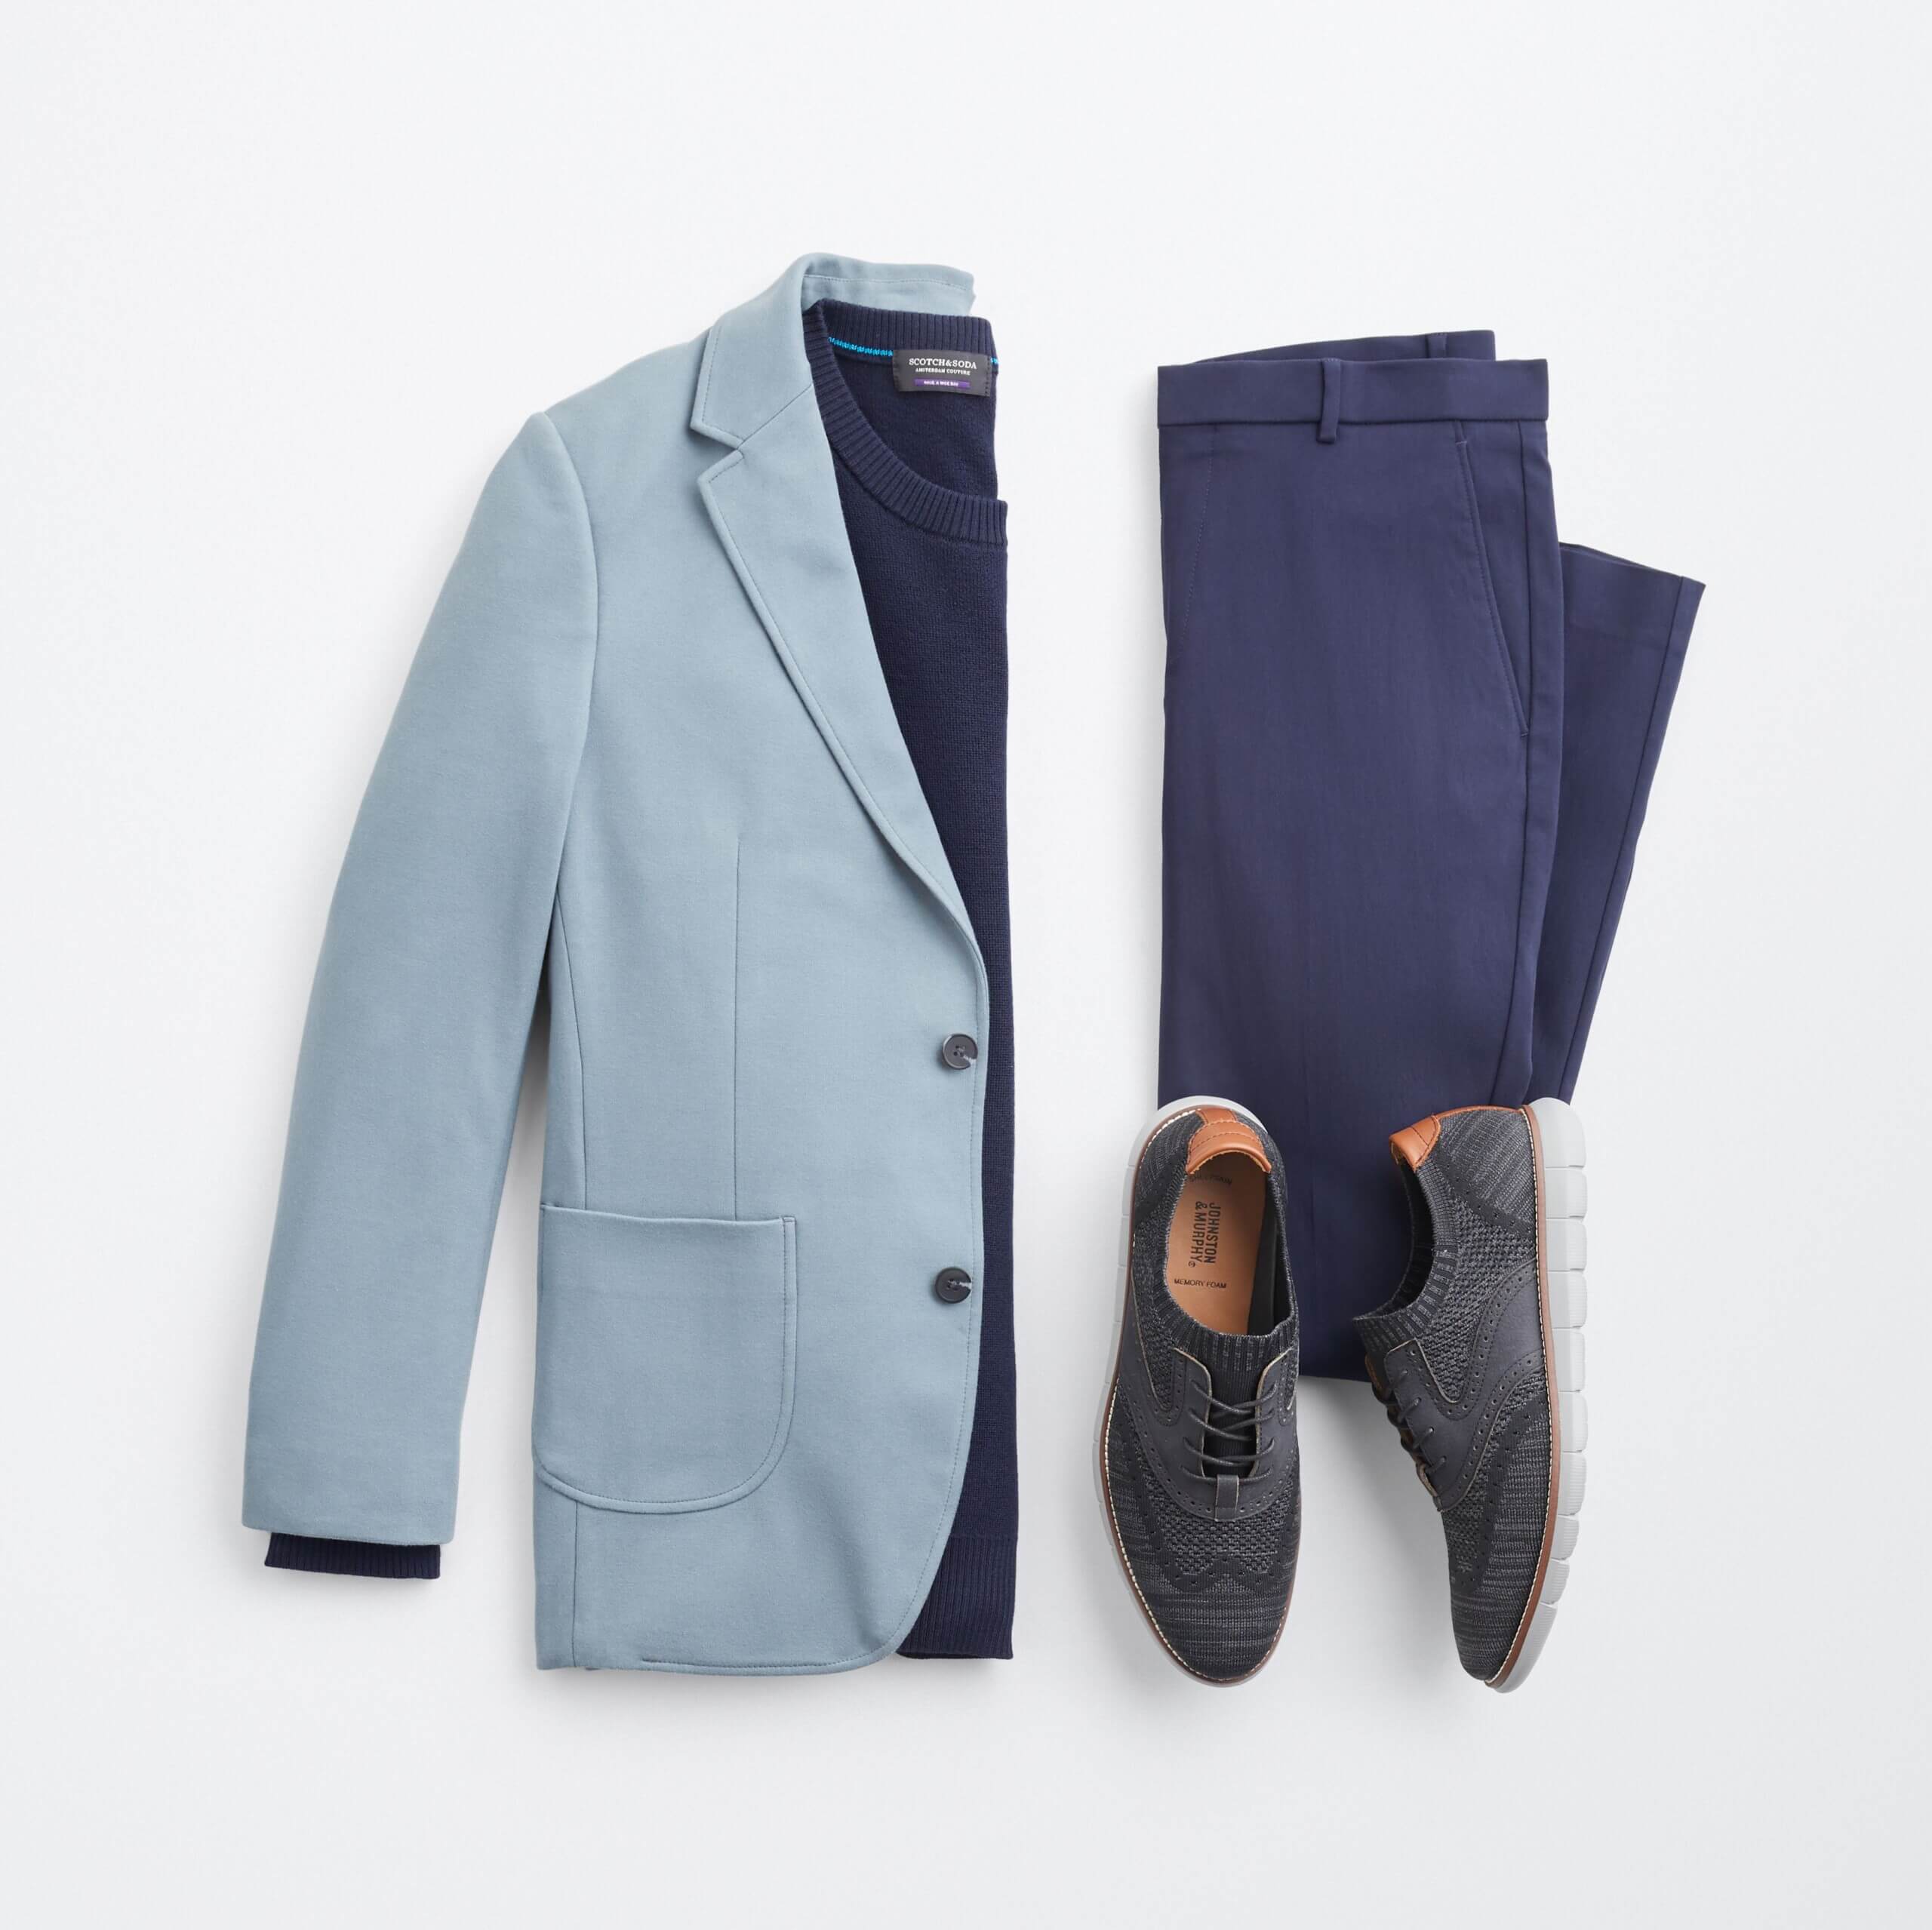 Stitch Fix men’s outfit for shorter men featuring light blue sport coat, navy sweater, navy slacks and dark grey sport-sole lace-up shoes.